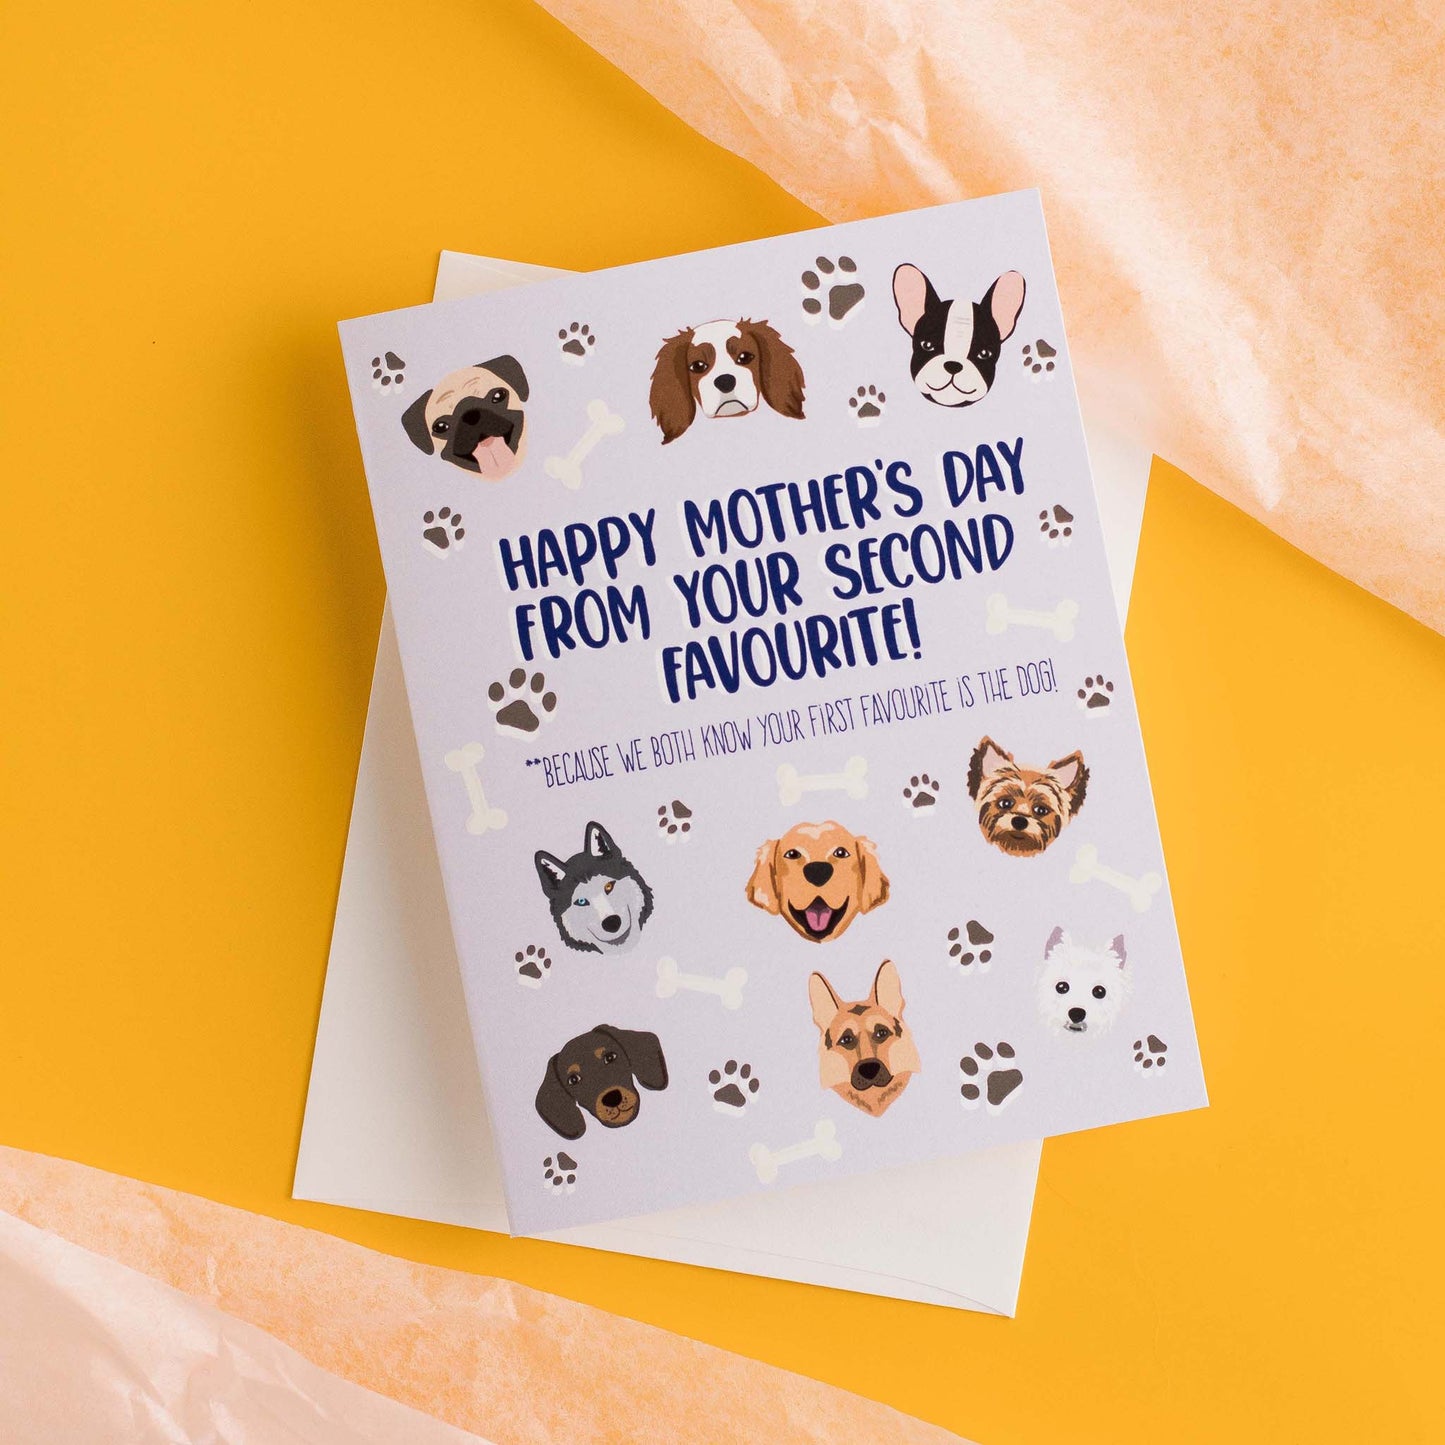 Happy Mother's Day From Your Second Favourite! - Greeting Card